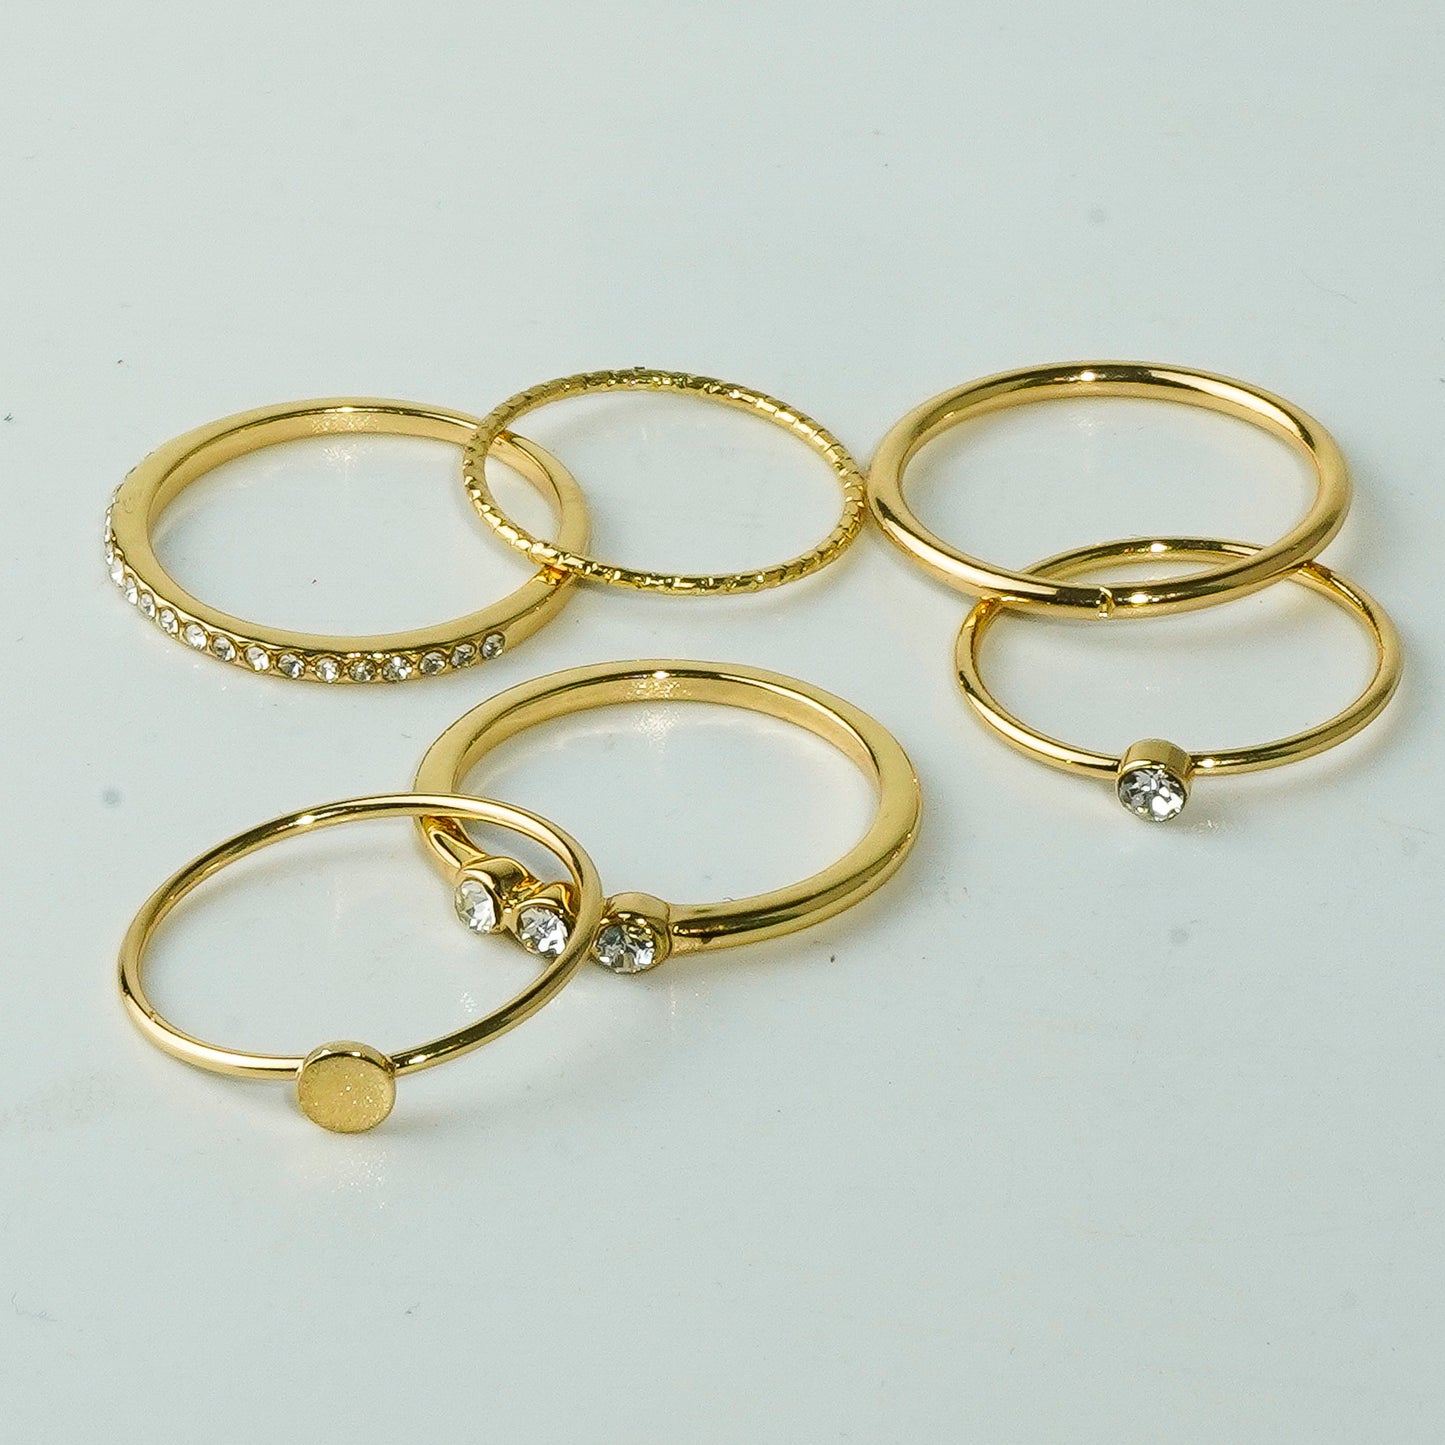 Trendy Set Ring For Fashionable Women(Code:R08)